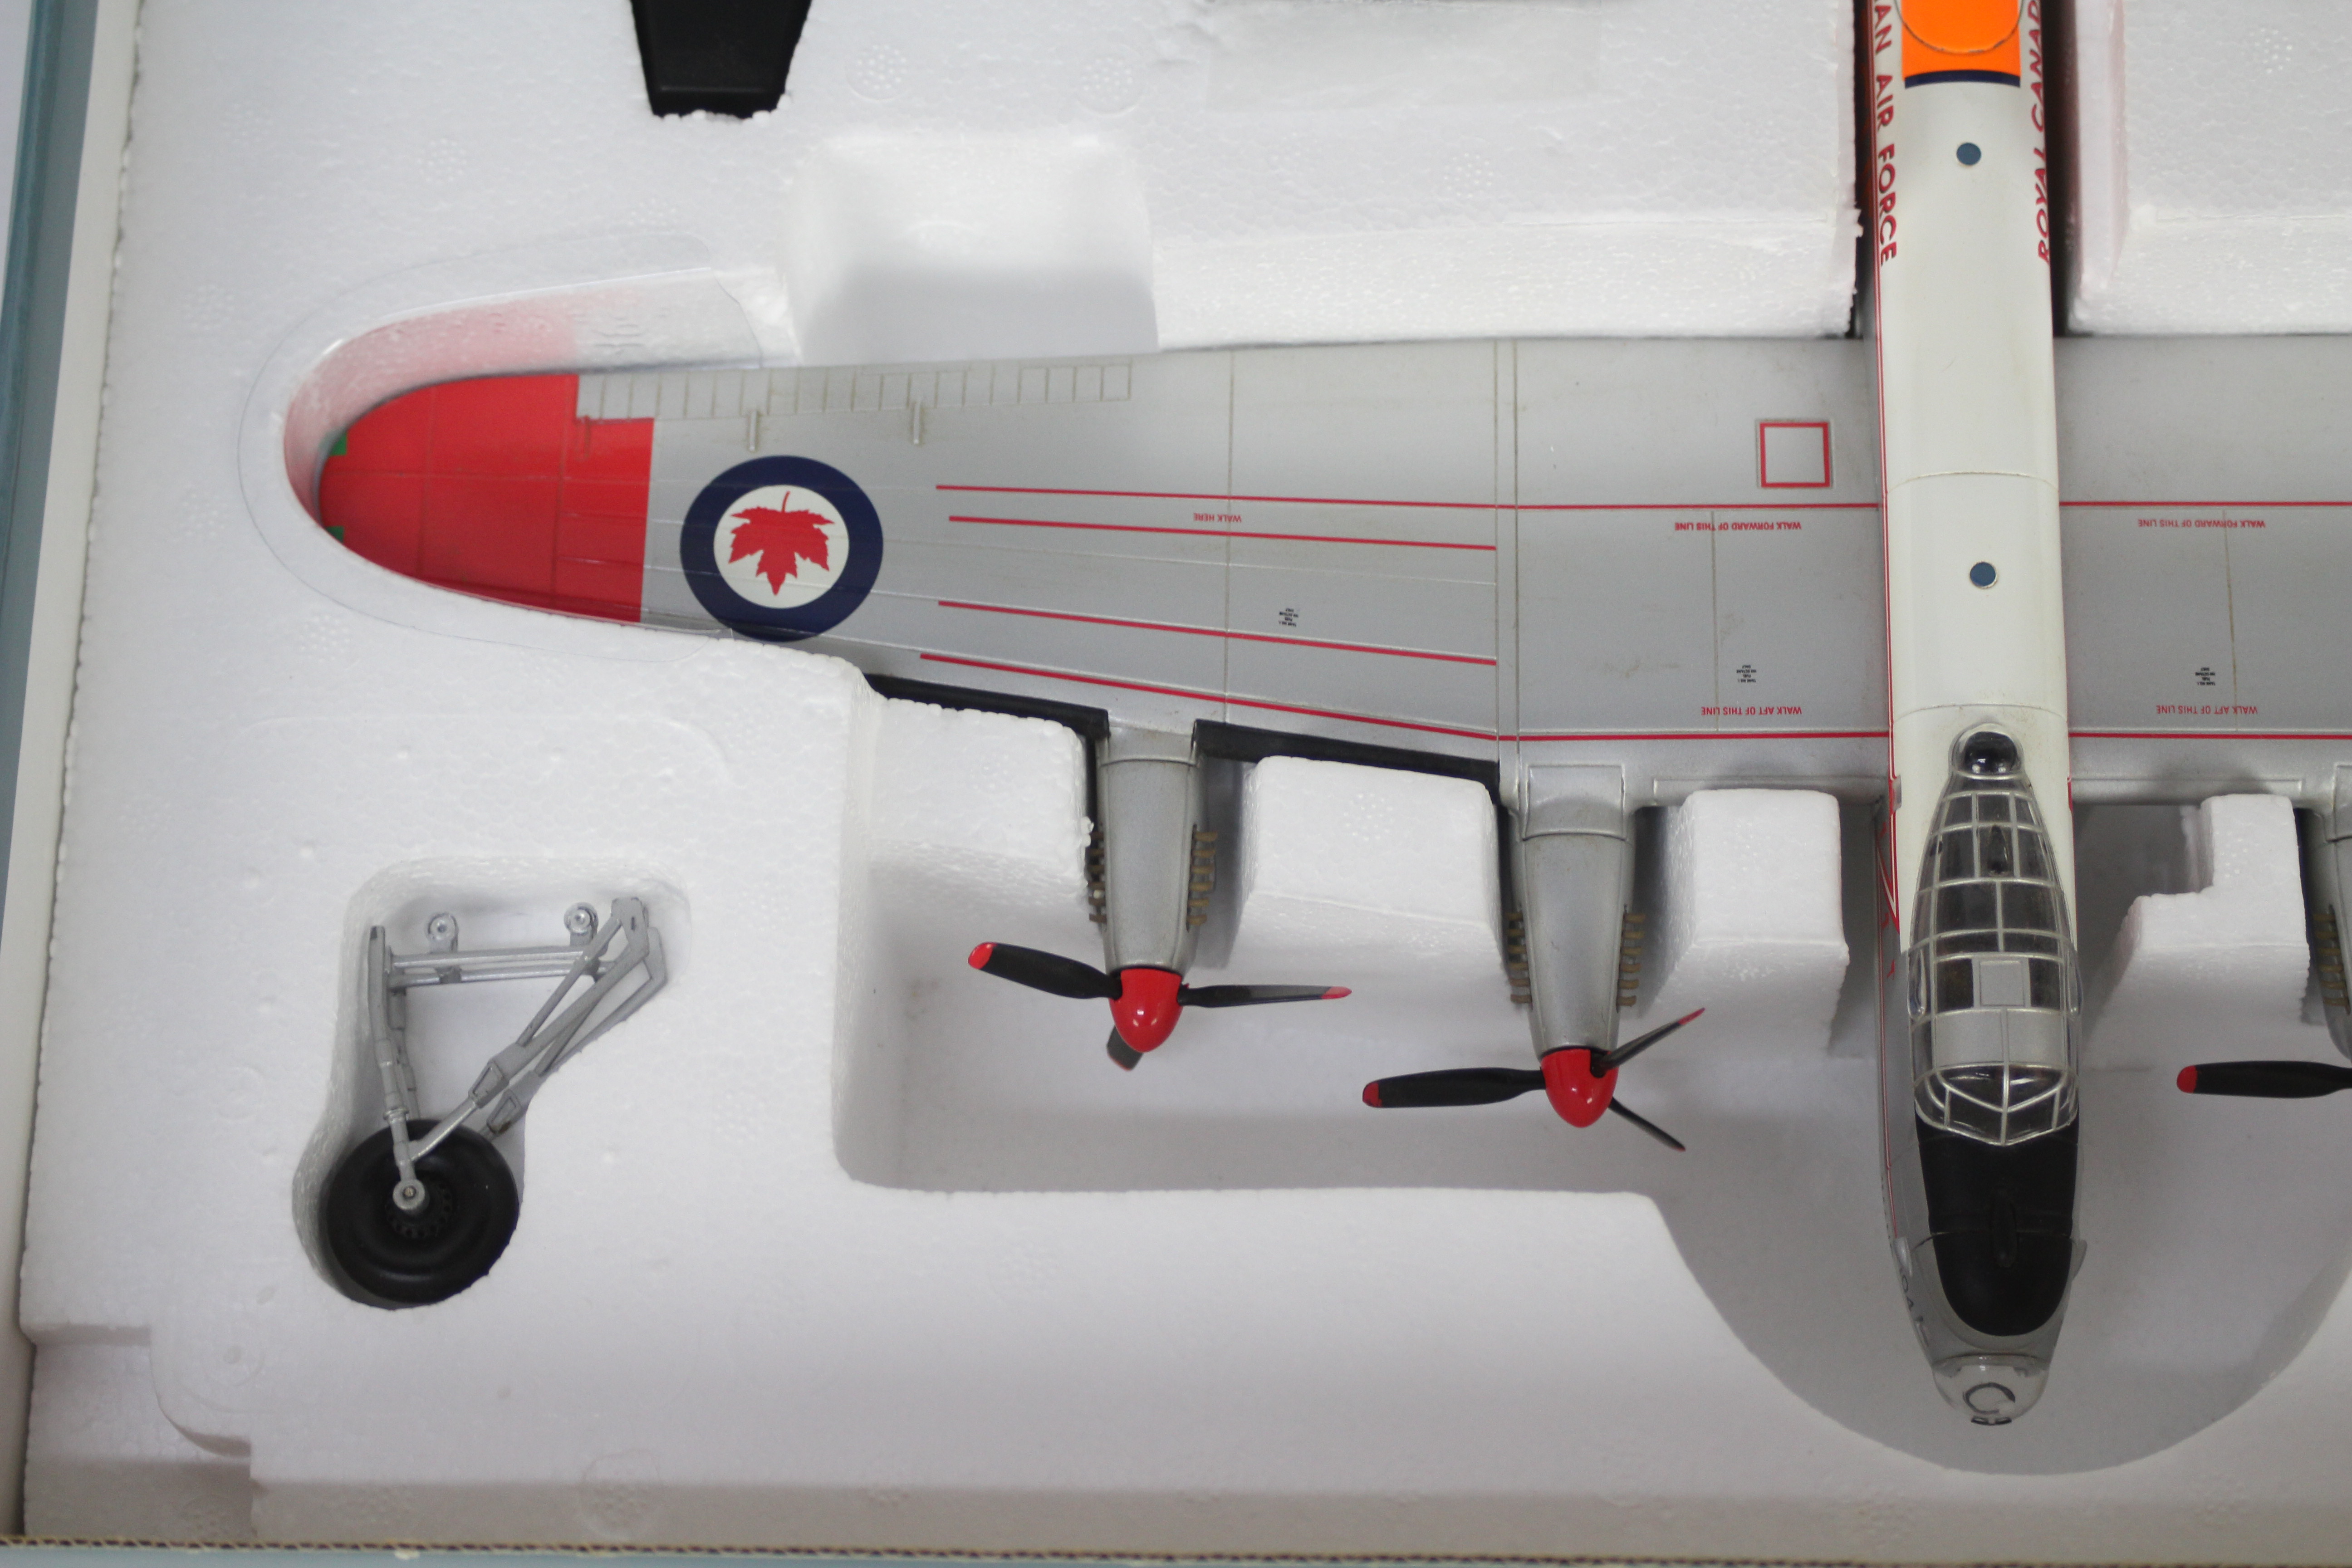 Corgi Aviation Archive - A boxed Limited Edition 1:72 scale AA32606 Avro Lancaster Mk. - Image 5 of 10